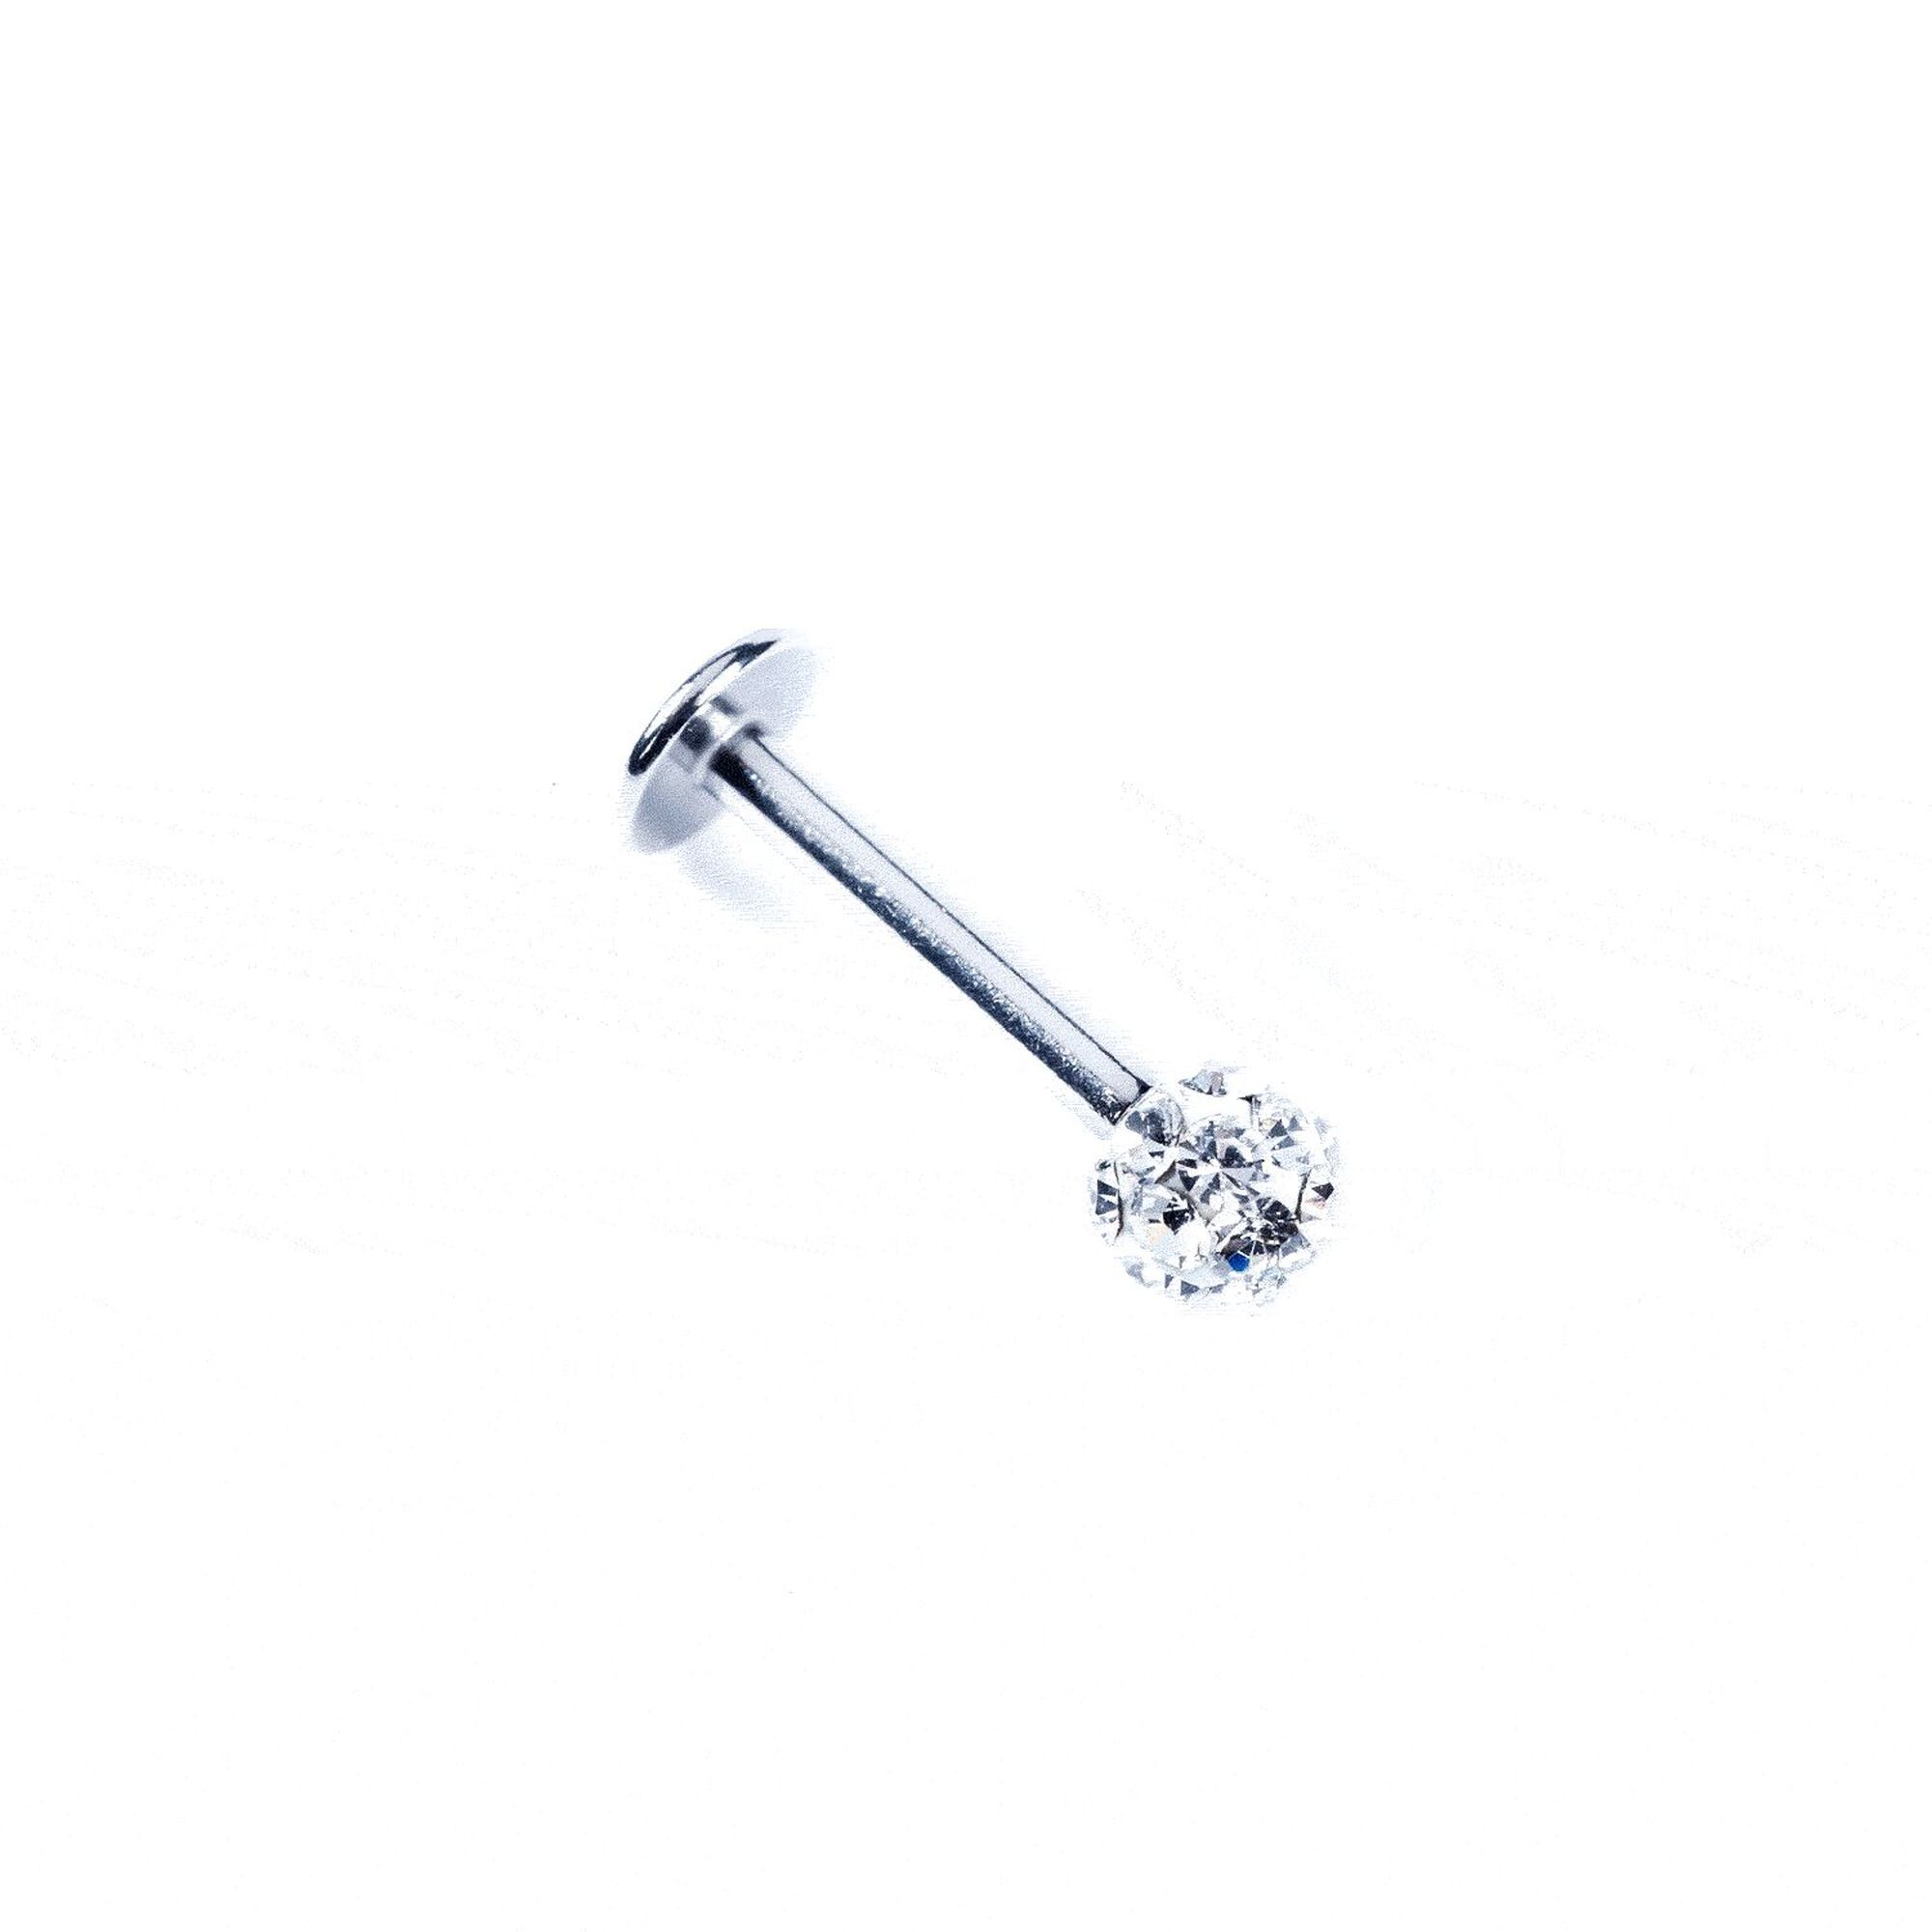 View Claires 16G Fireball Tragus Stud Earring Silver information